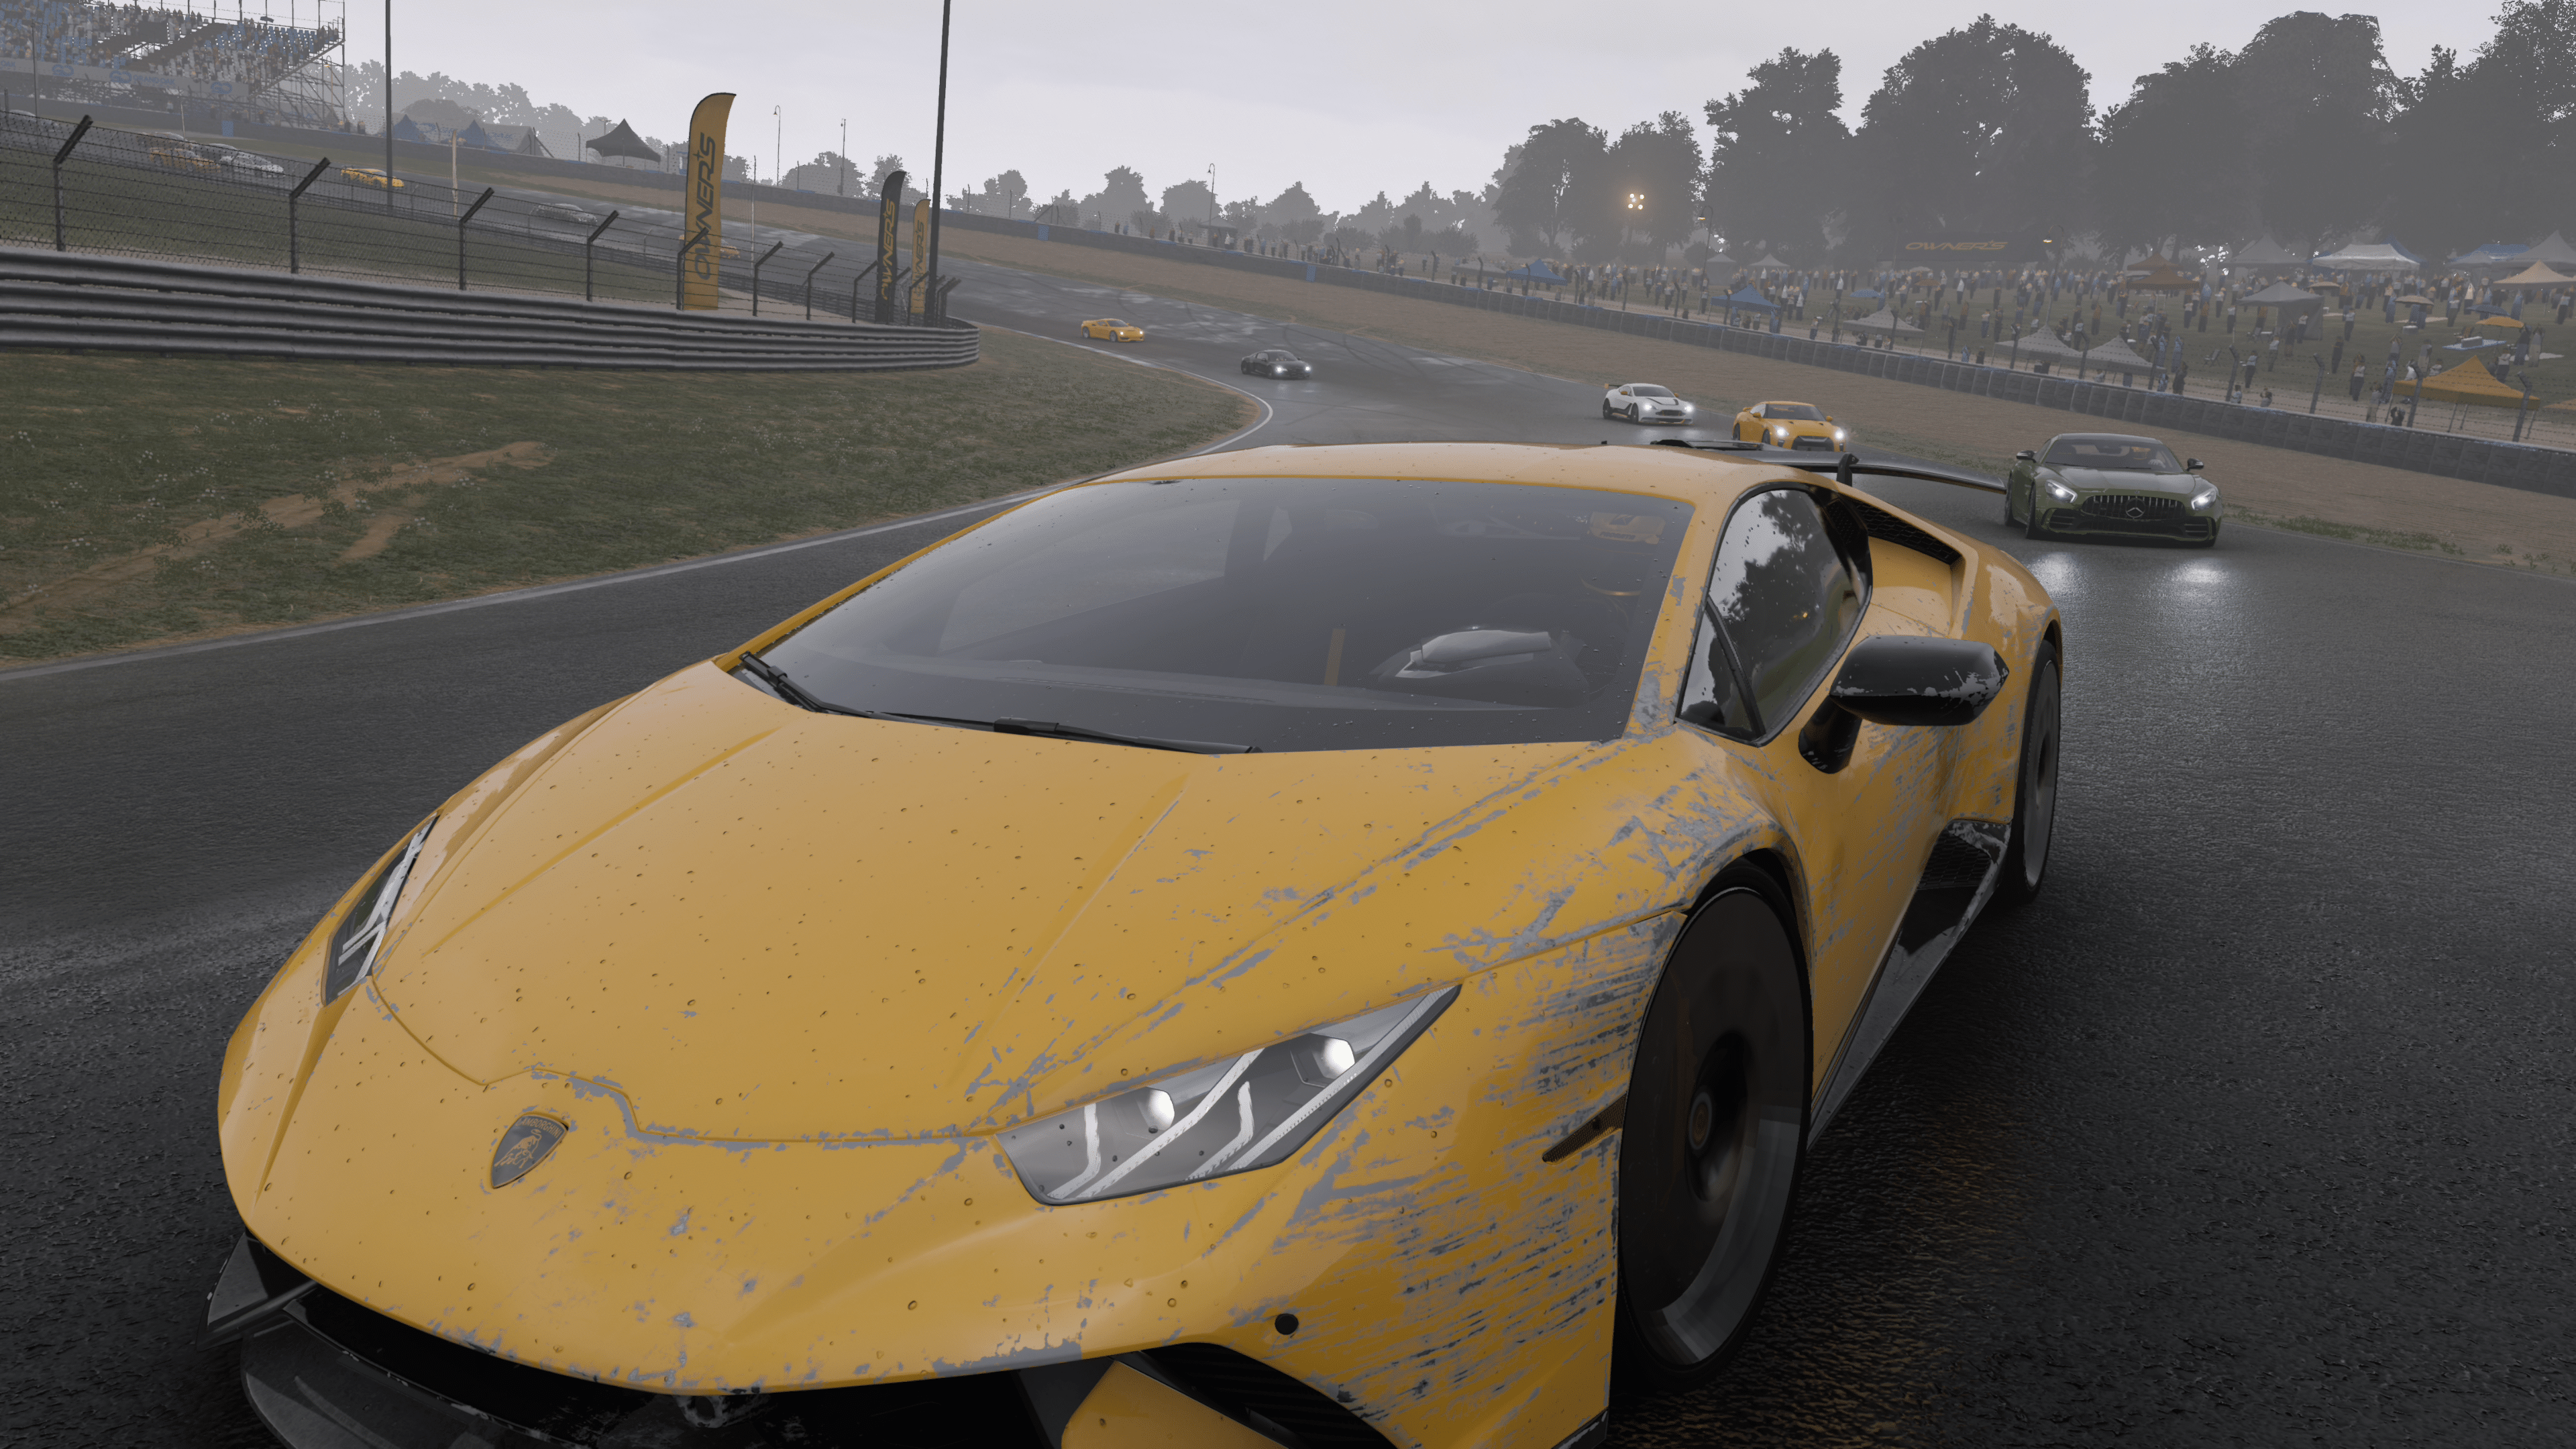 Forza Motorsport 8 best cars: top picks for dominating the track